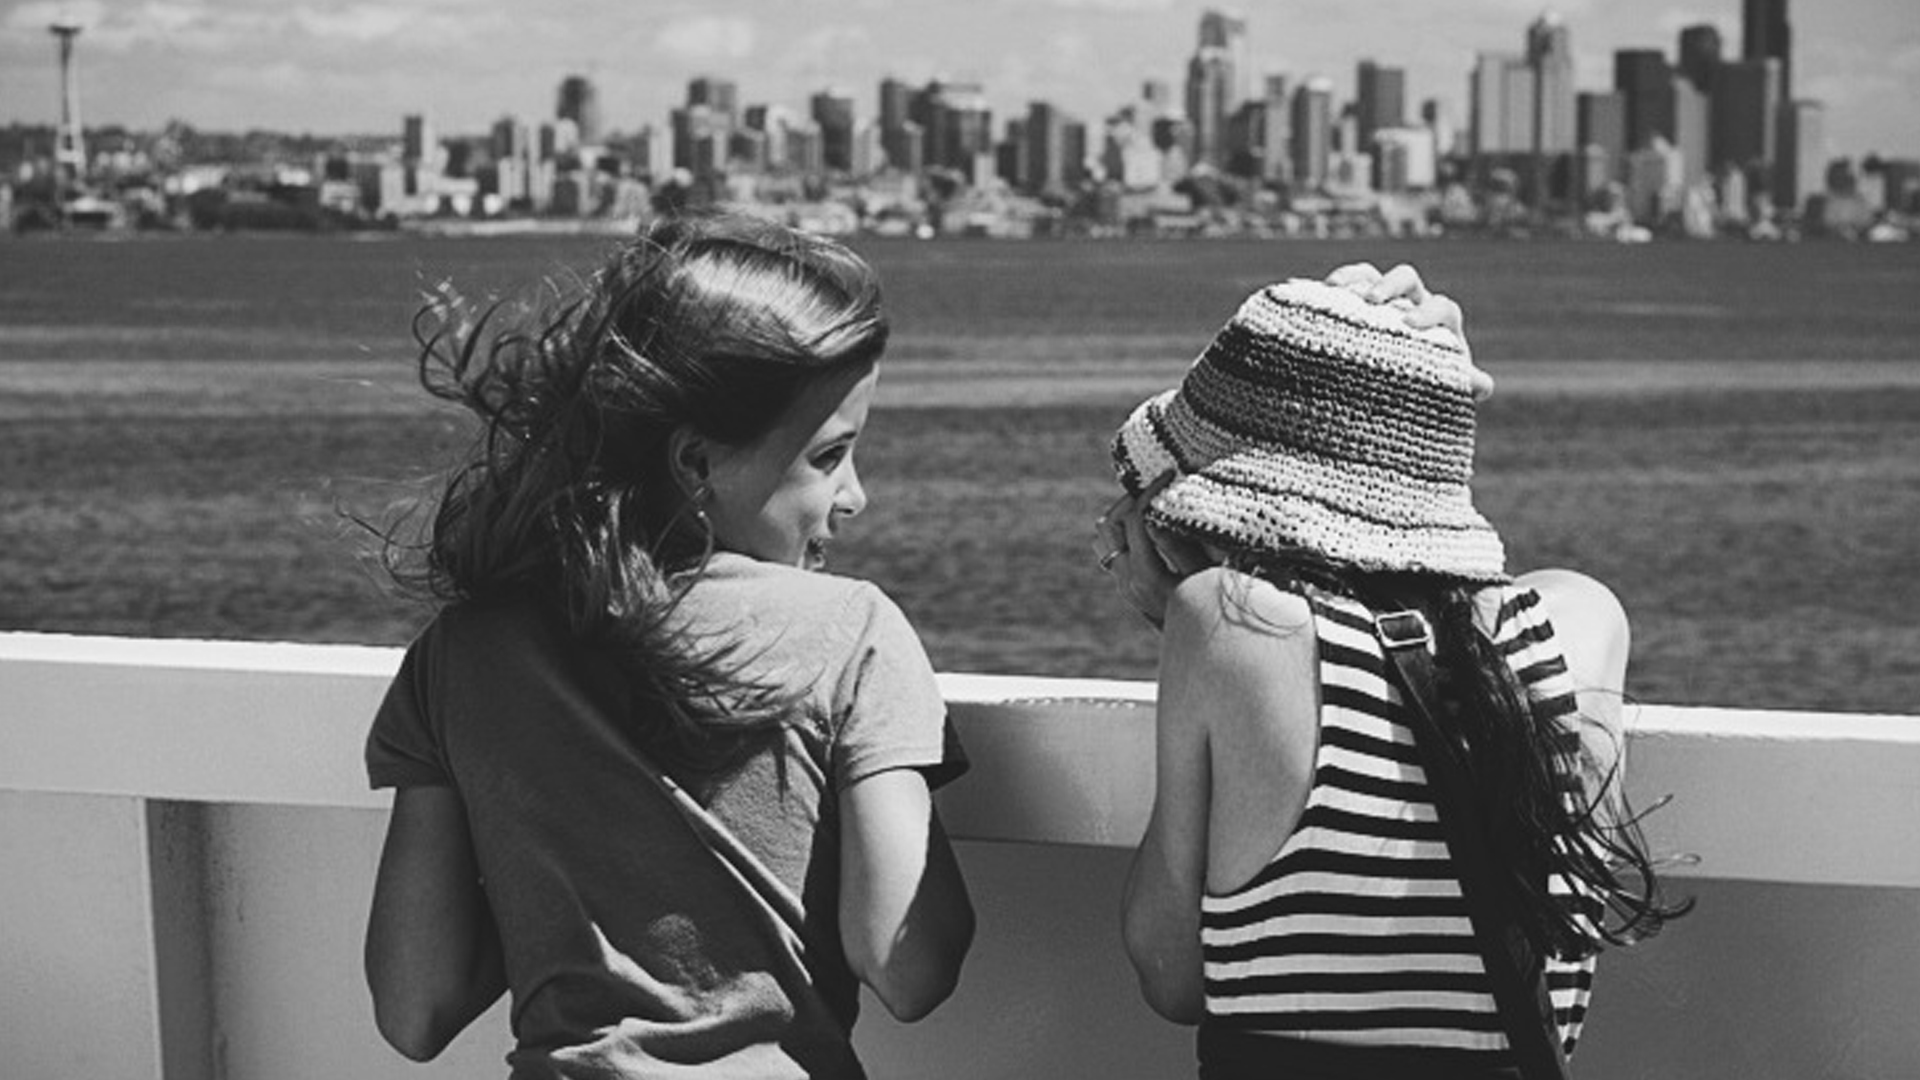 Two girls talking on the ferry